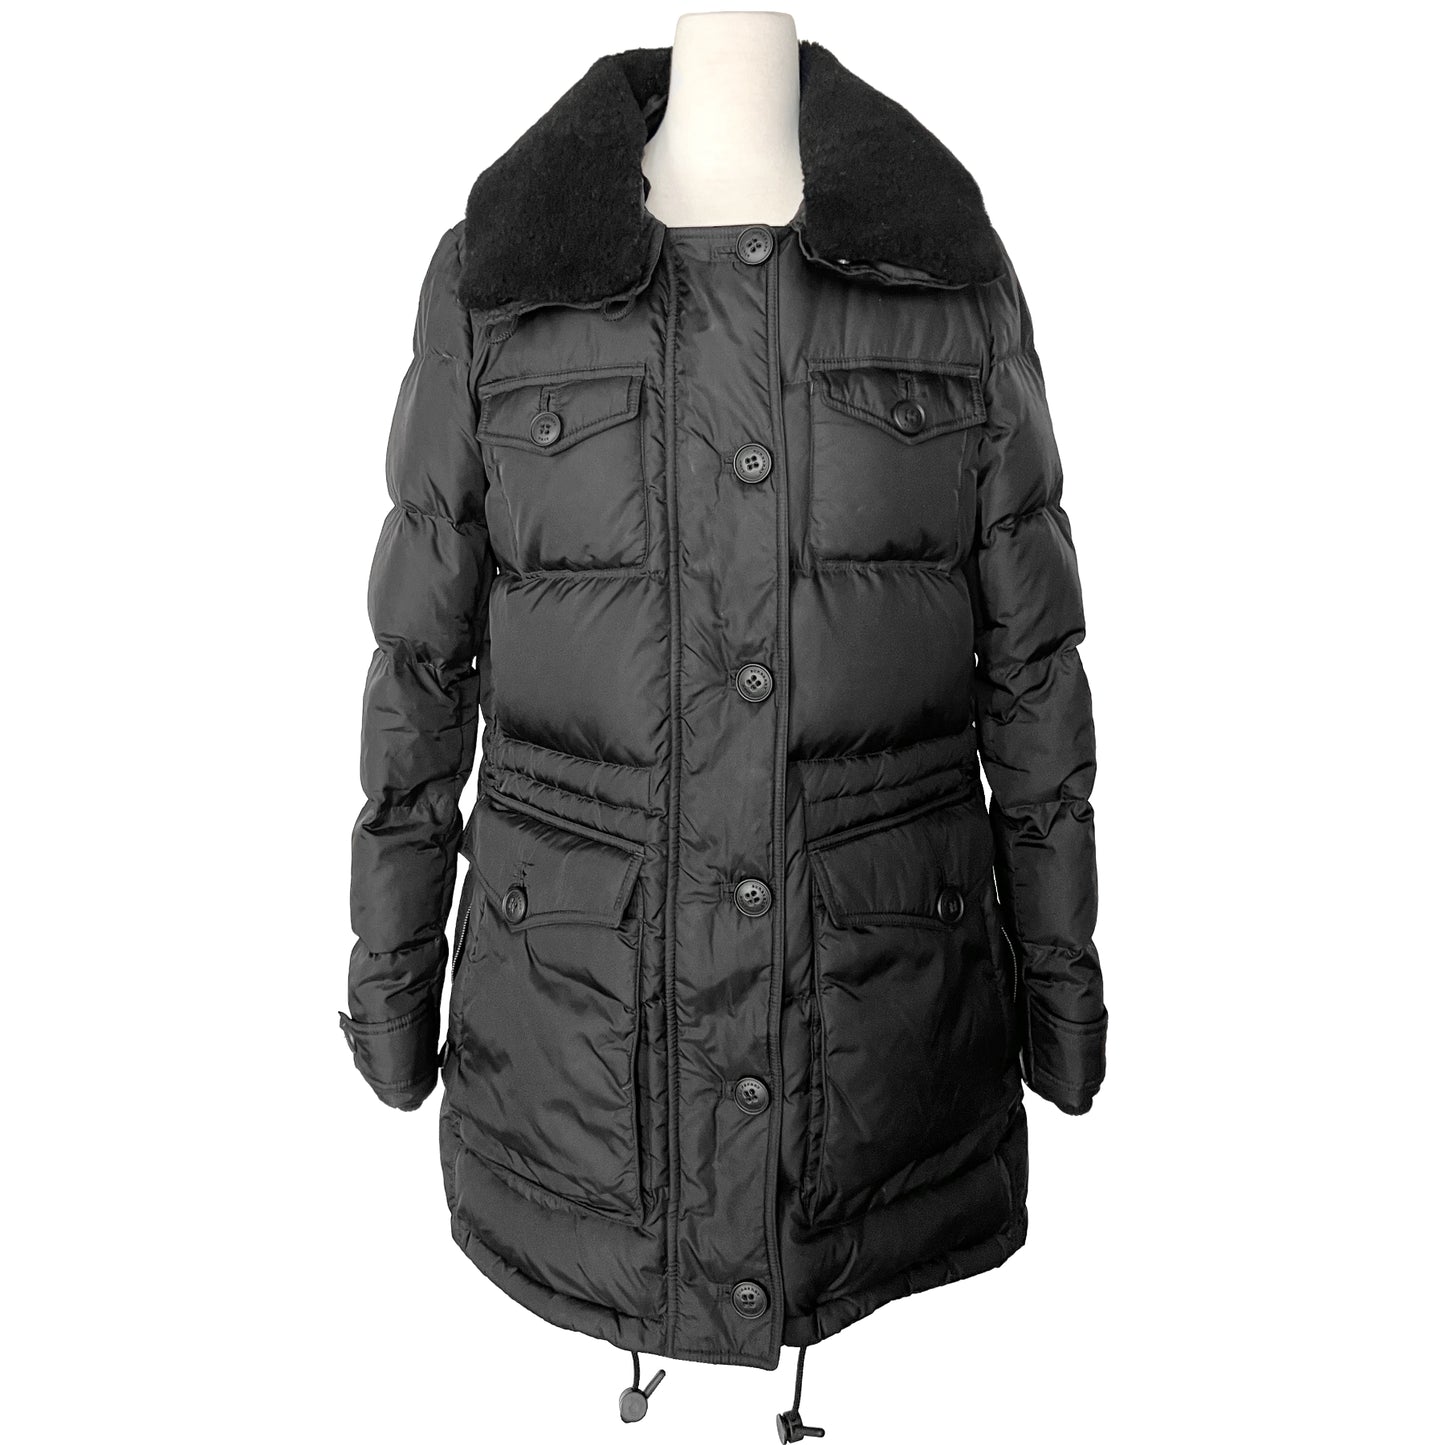 Burberry Brit Shearling Collar Black Quilted Puffer Jacket Winter Coat